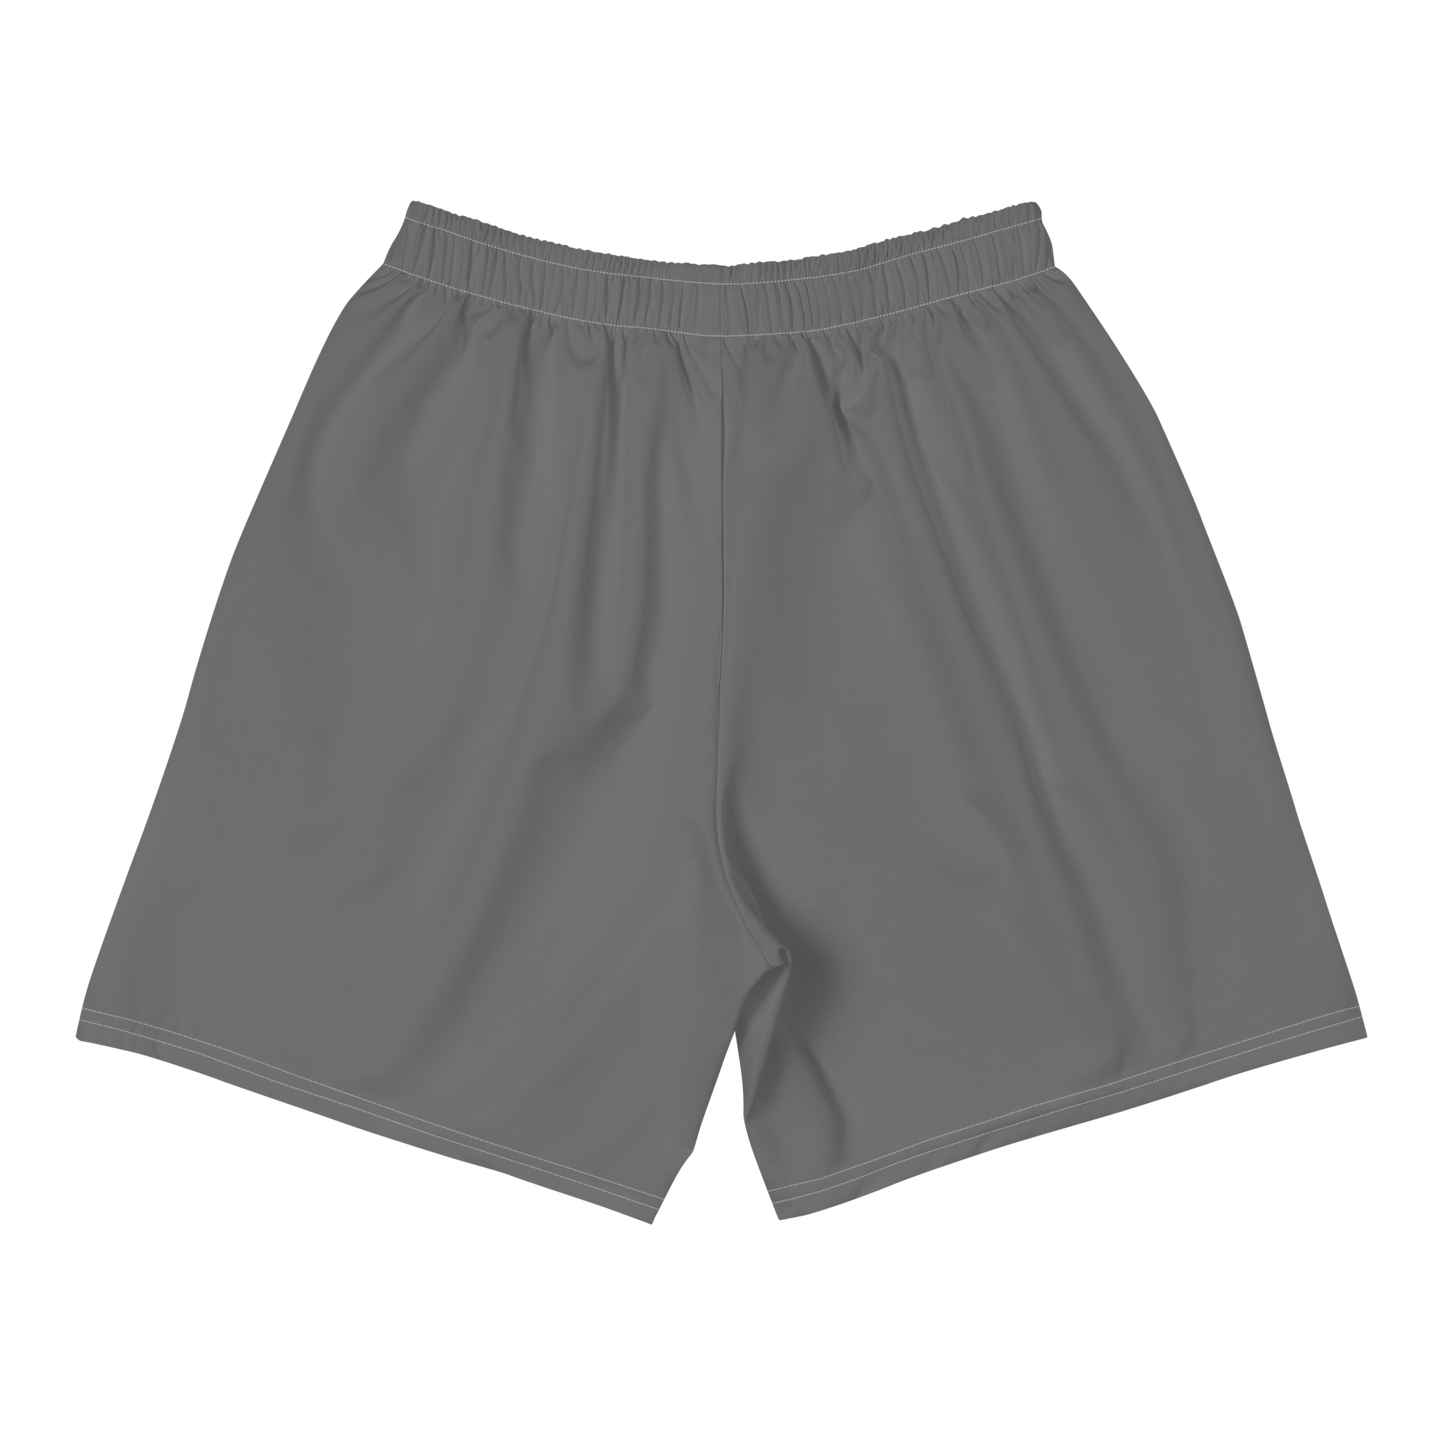 DWMD 'Stained Grey' Shorts